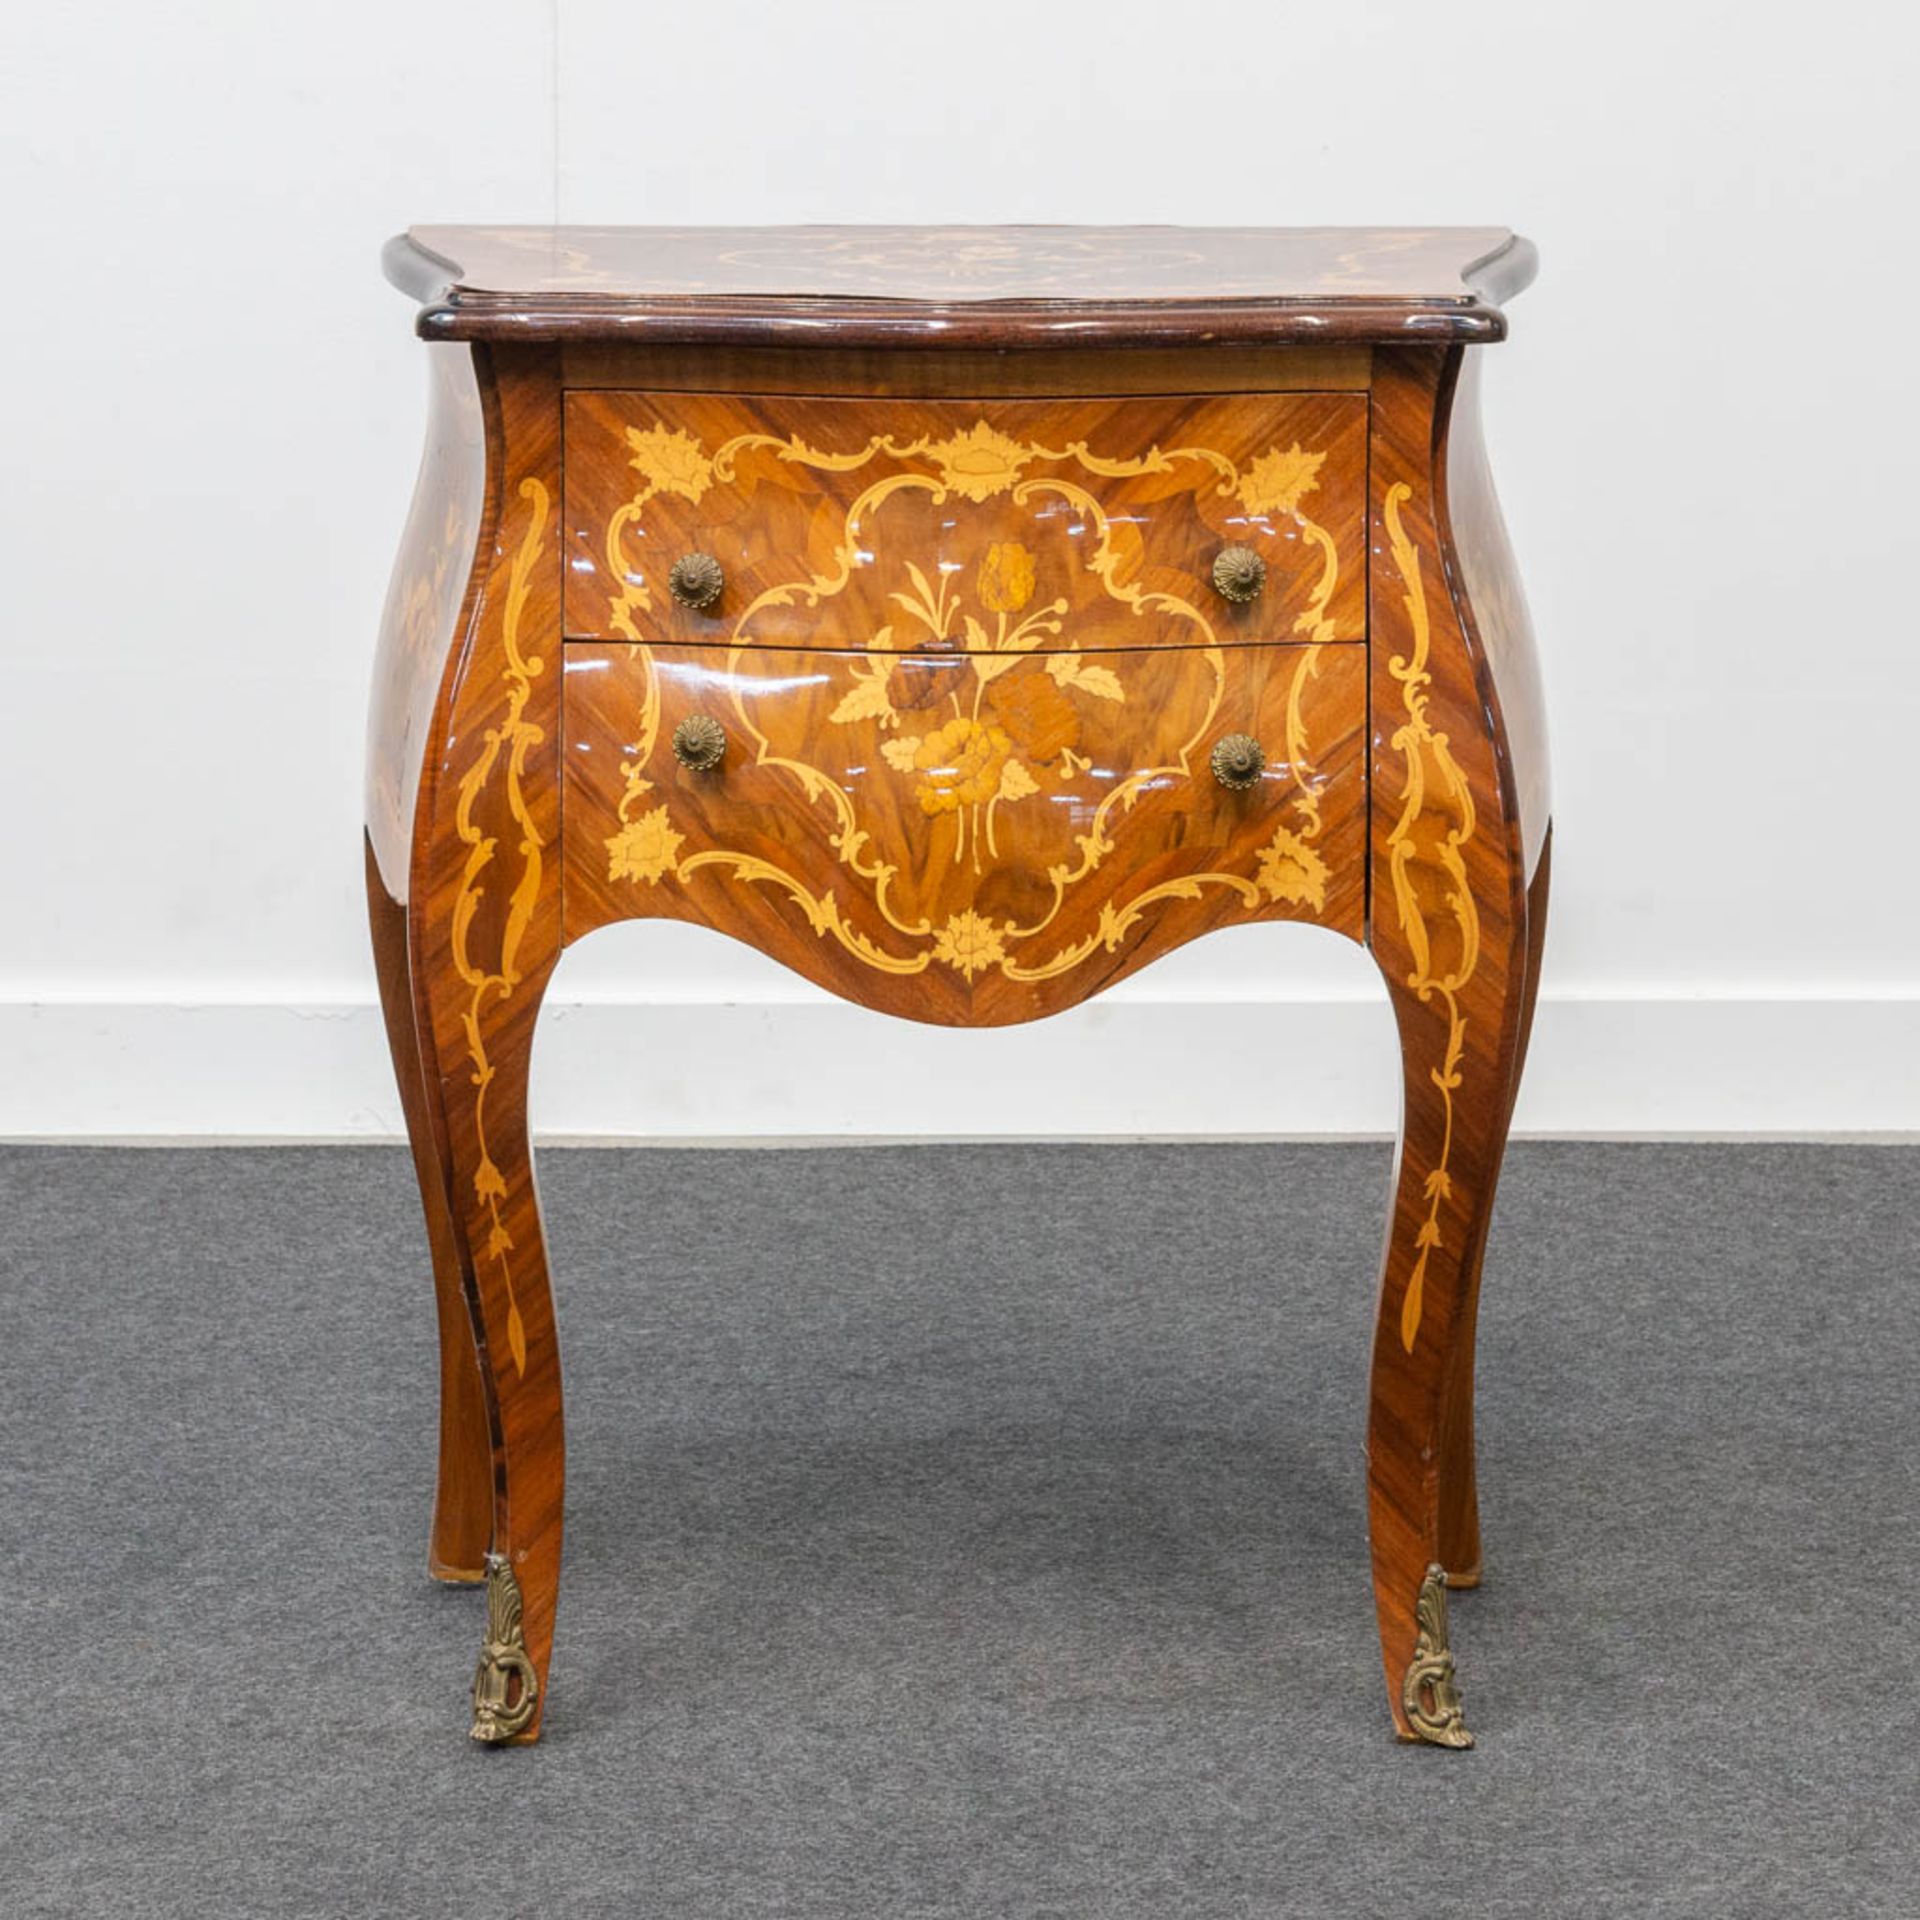 A small two-drawer side cabinet with marquetry inlay.